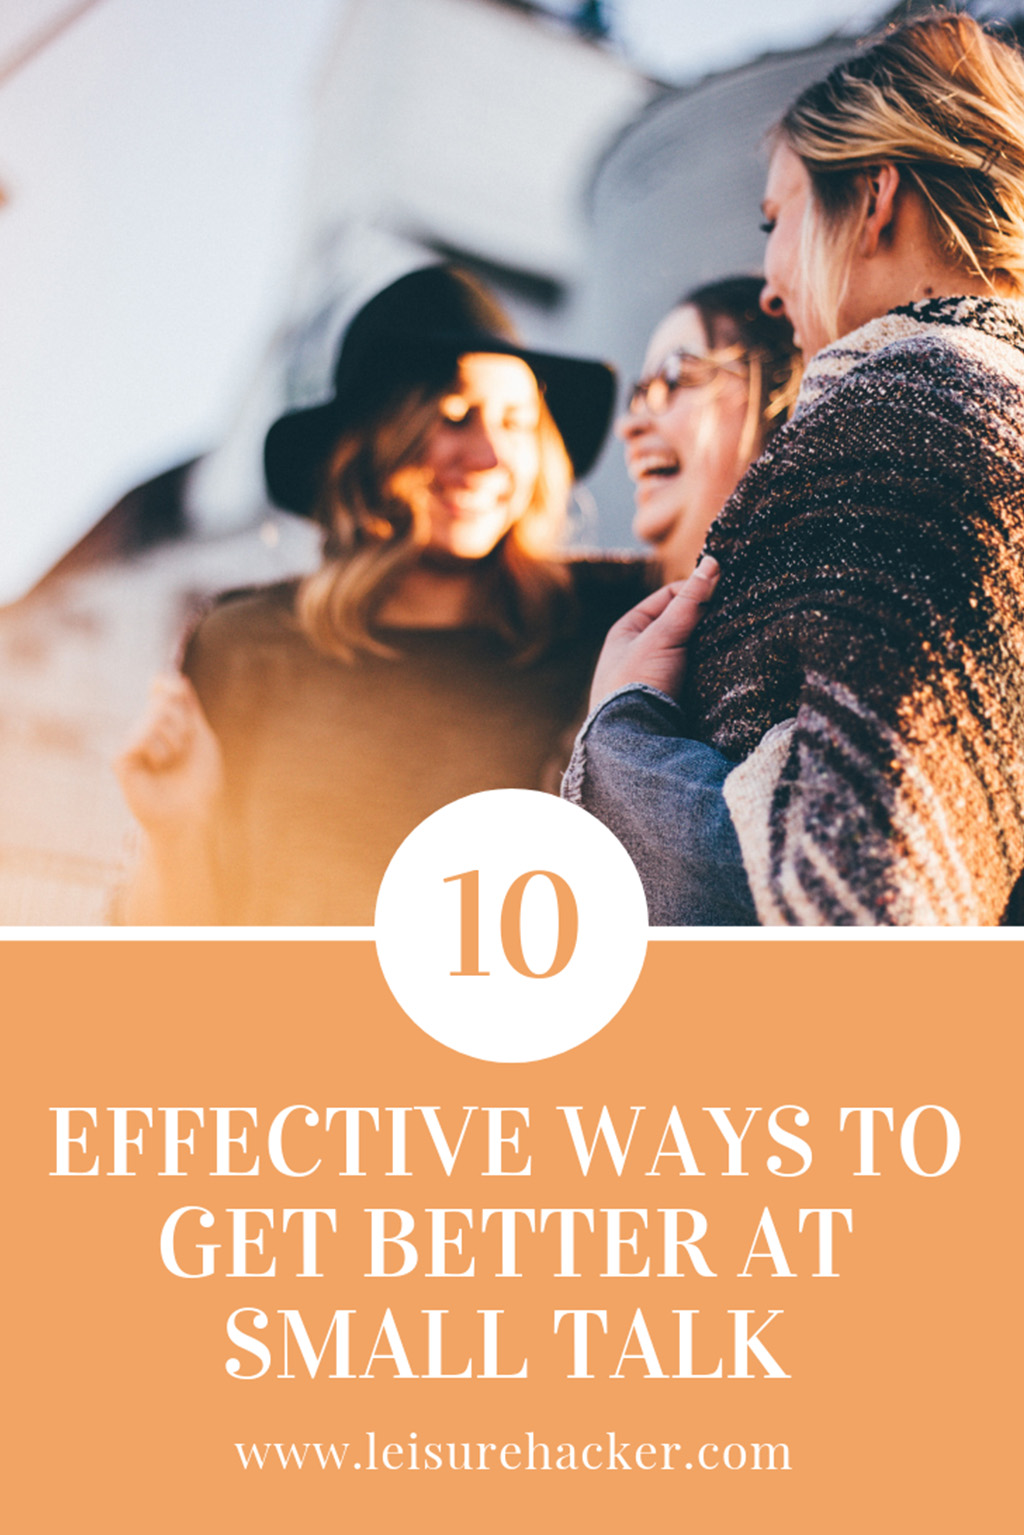 10 effective ways to get better at small talk